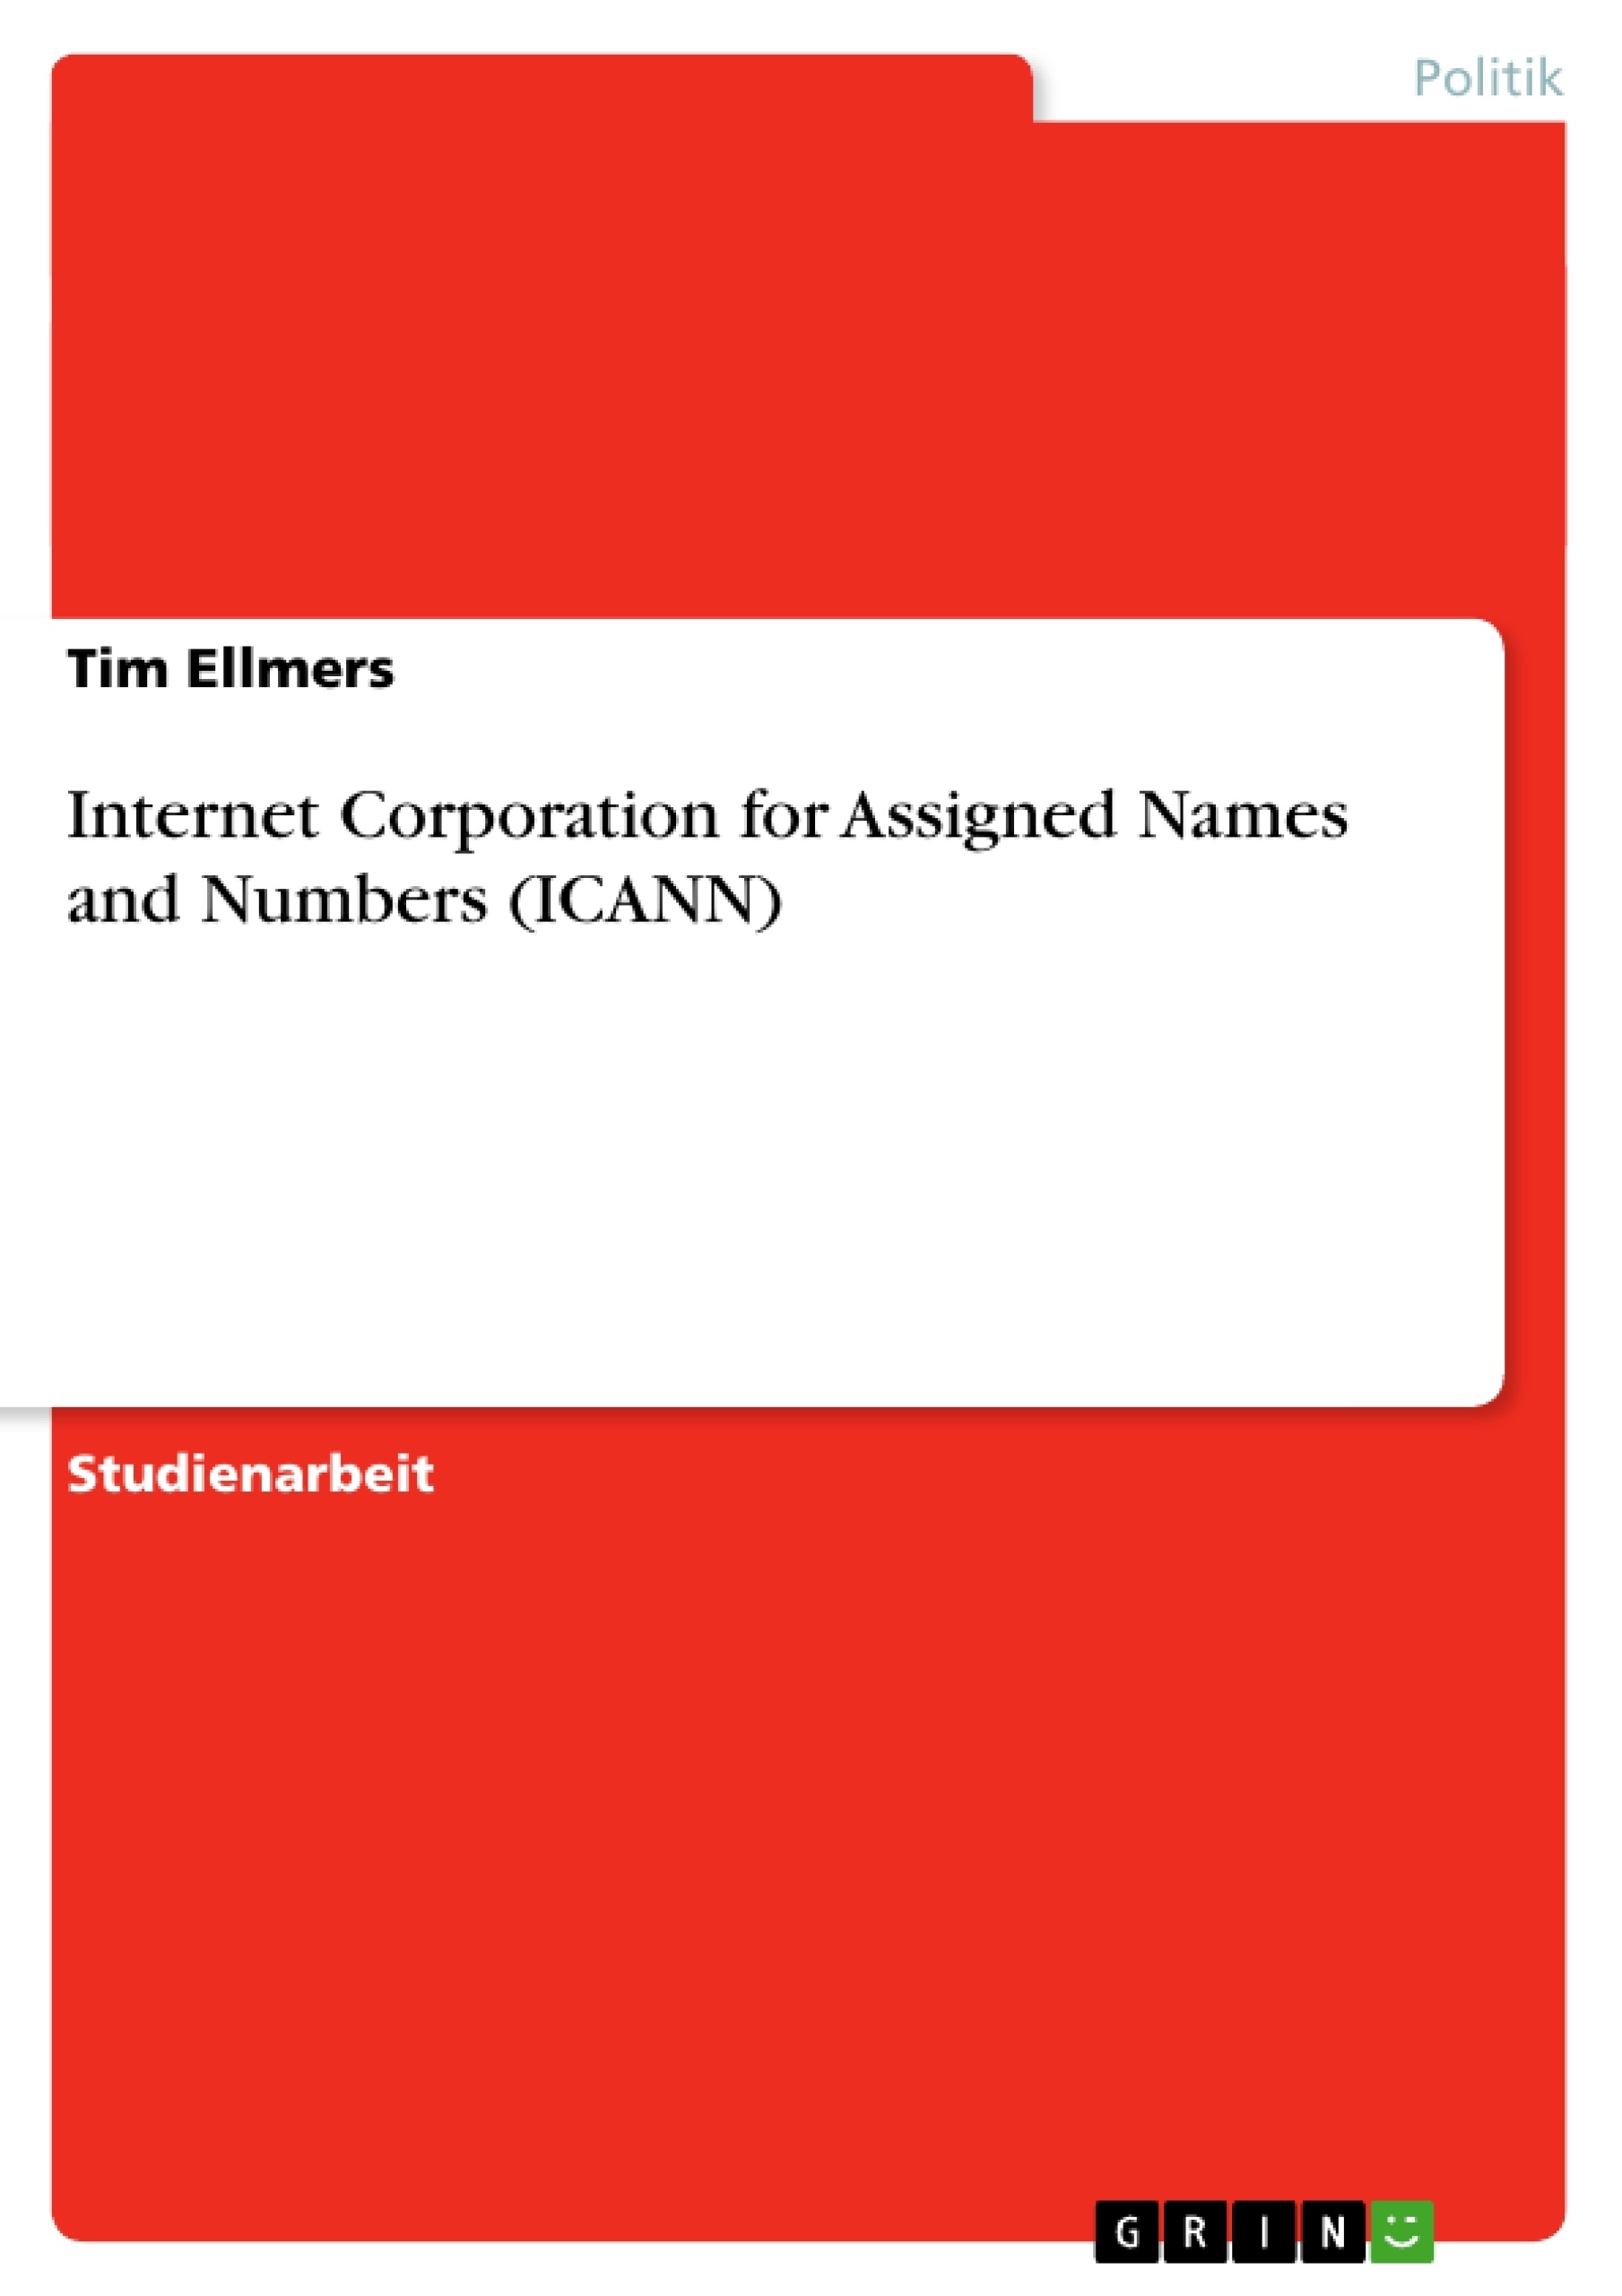 Titel: Internet Corporation for Assigned Names and Numbers (ICANN)